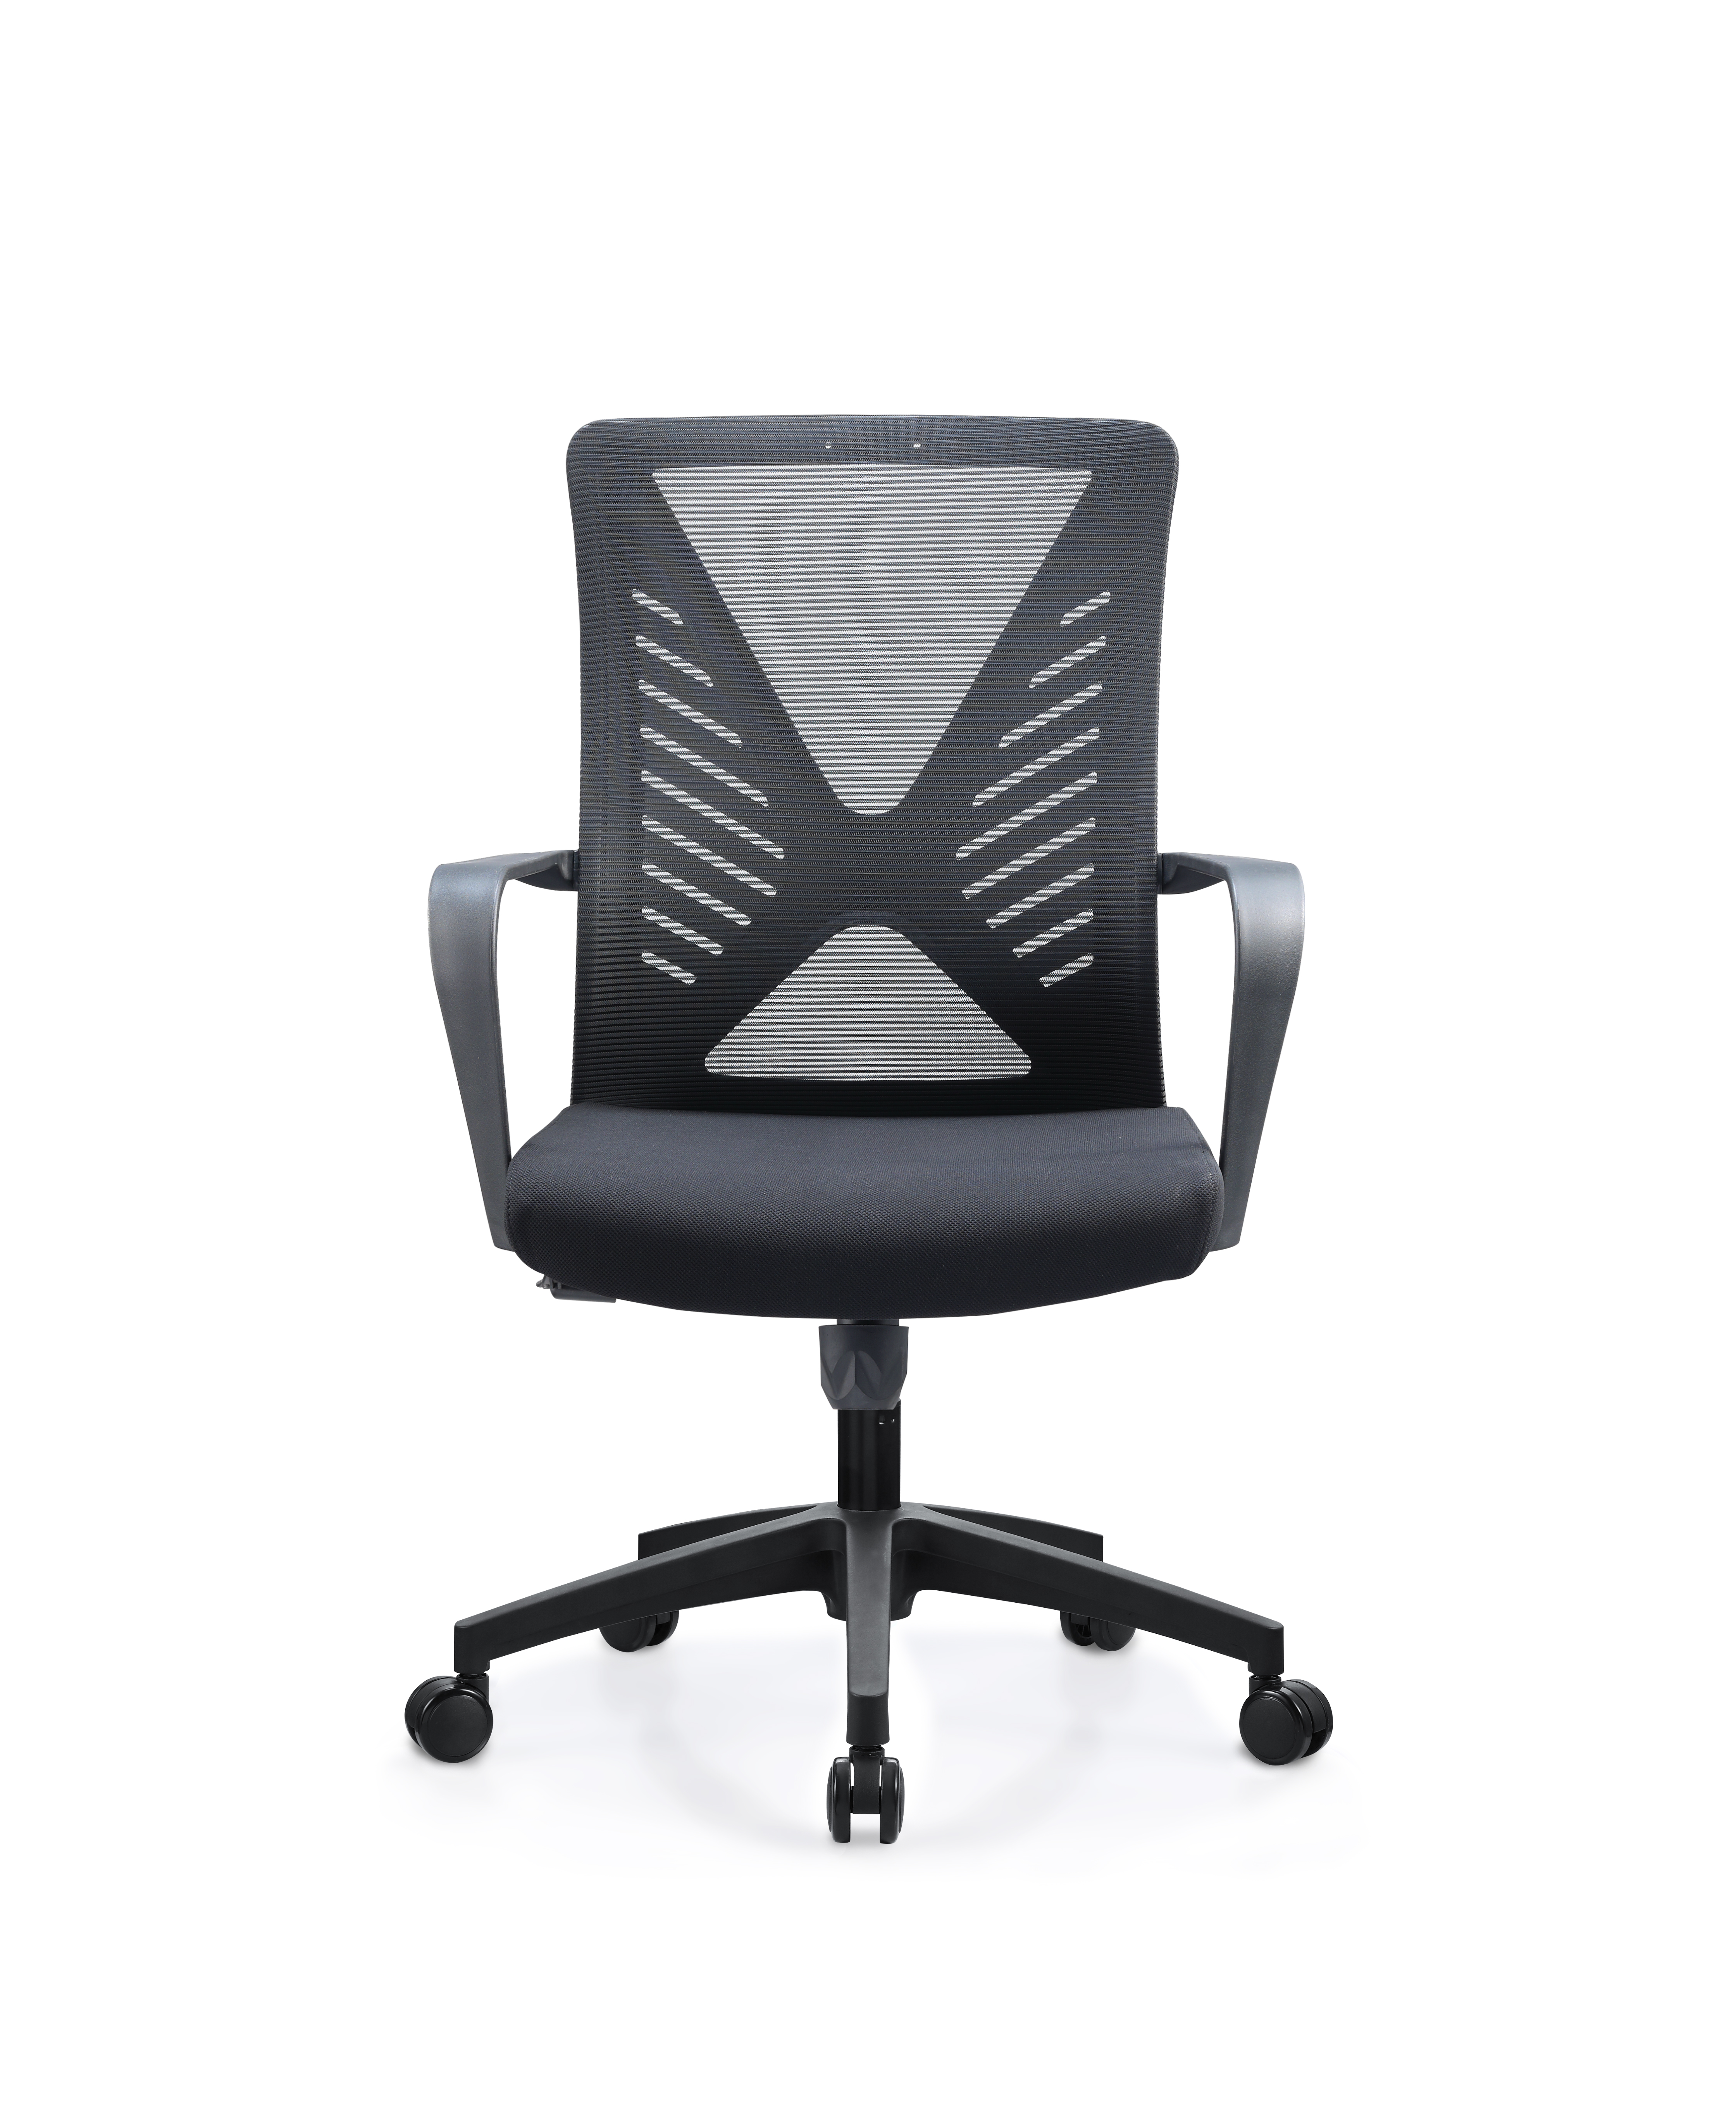 Newcity 559B Wholesale Modern Adjustable Mesh Chair Executive Mesh Chair Swivel Manager Mesh Chair Middle Back Mesh Chair Supplier Foshan China